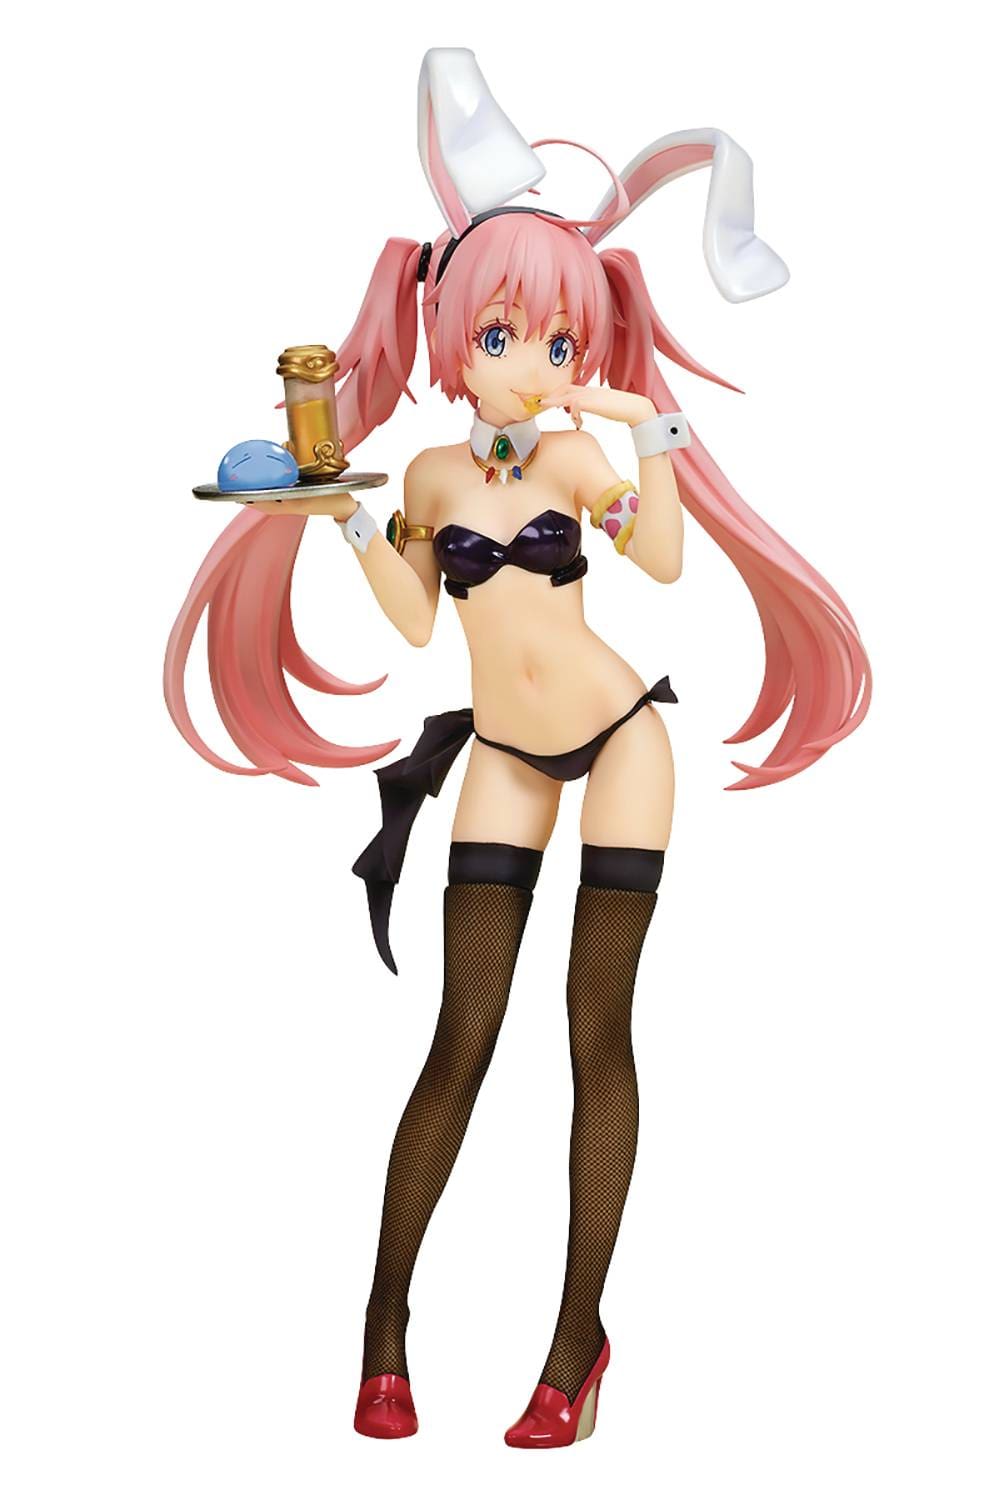 QuesQ: That Time I Got Reincarnated as a Slime - Millim Nava 1:7 Statue, Bunny Girl Style - Third Eye